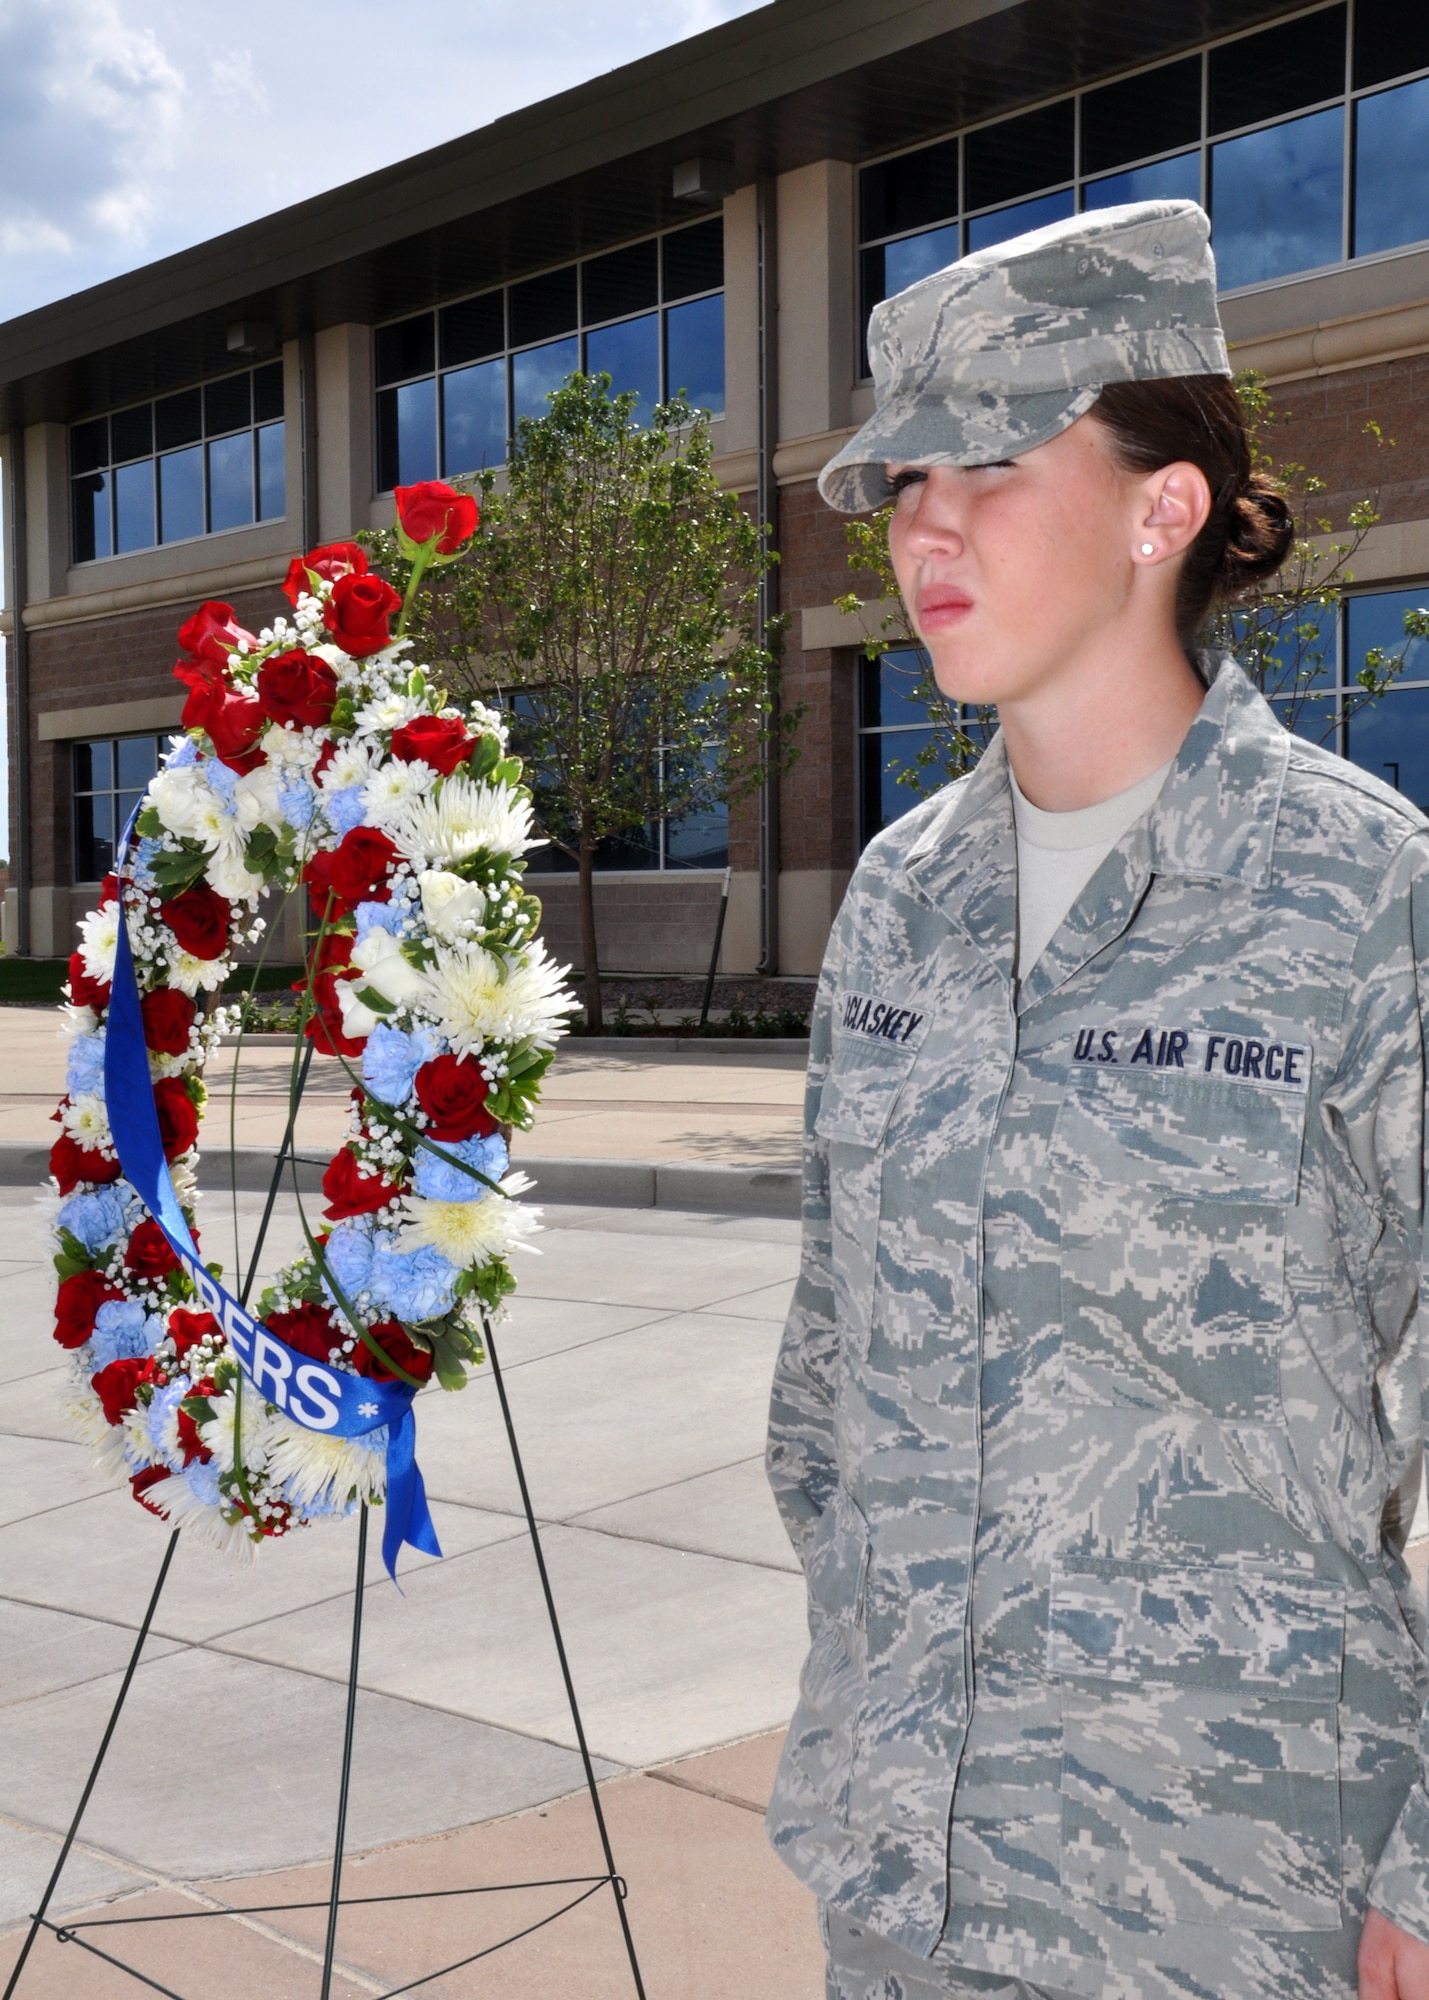 BUCKLEY AIR FORCE BASE, Colo. -- Airman 1st Class Kaitlyn McClaskey, 460th Operations Group, stands a lone vigil Sept. 9, 2011. Soldiers and Airmen honored those lost on Sept. 11, 2001. (U.S. Air Force photo by 2nd Lt. Rachel Freeman)